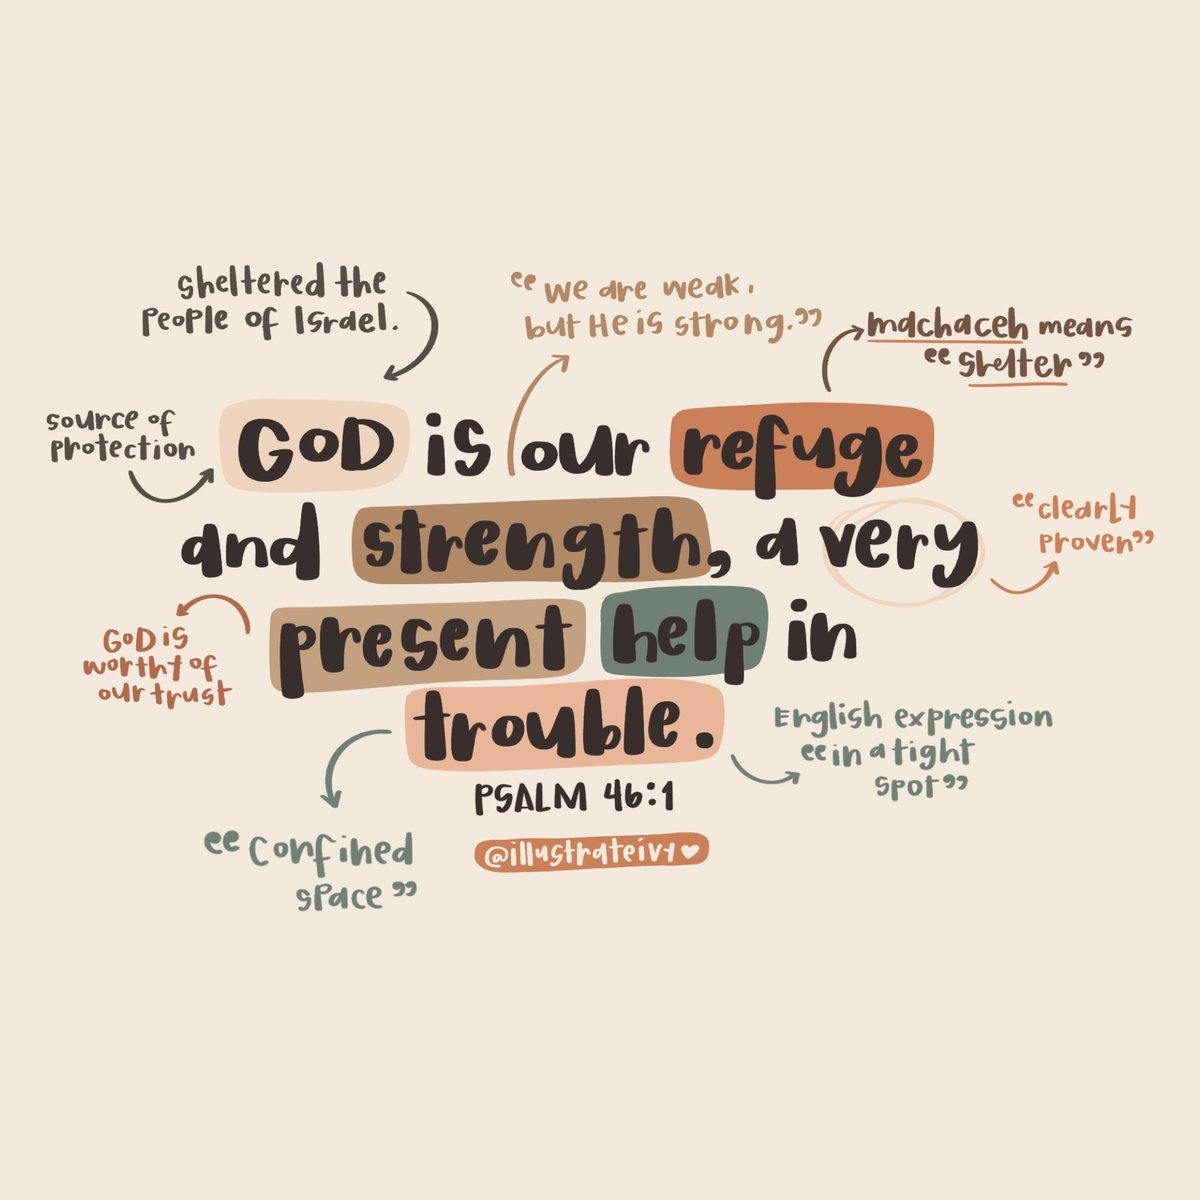 'God is our refuge and strength, a very present help in trouble.' — Psalm 46:1 May we find His comfort and strength to be a refuge for our weary hearts today and always.